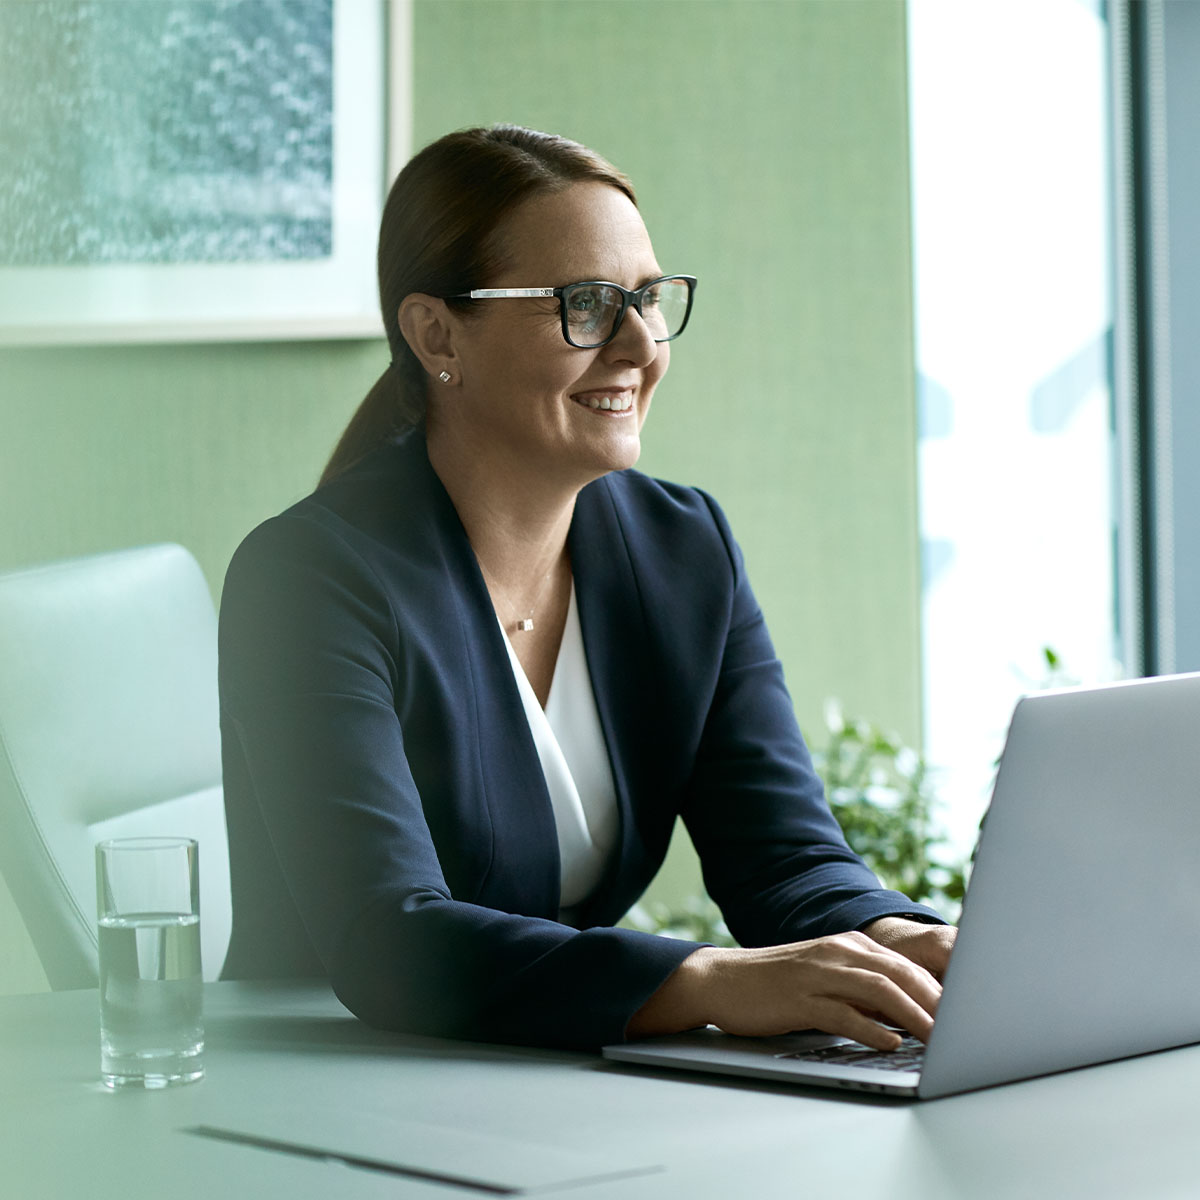 A businesswoman with glasses sitting at a desk working on laptop and smiling